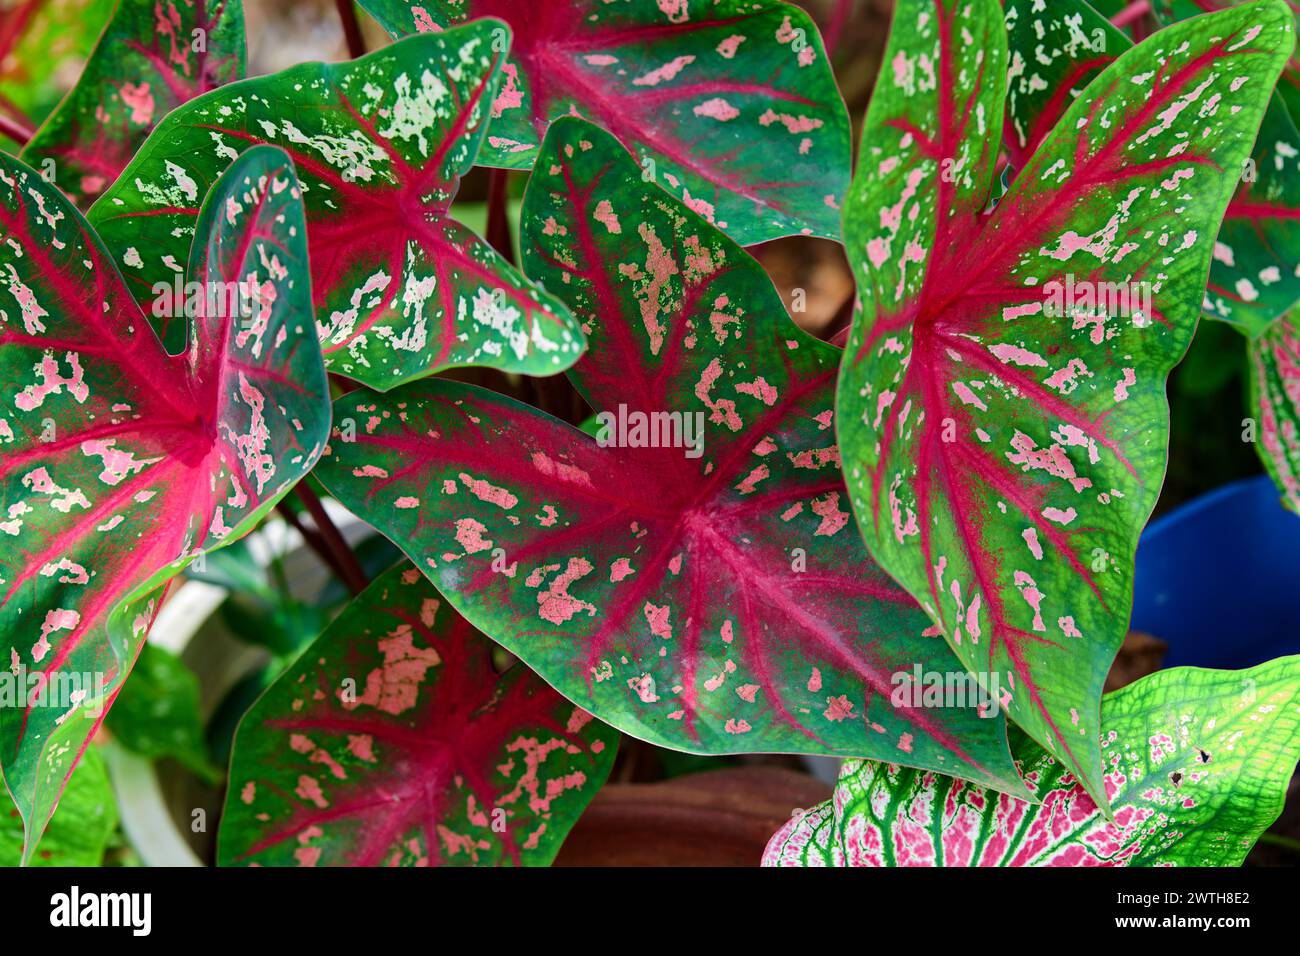 A beautiful of pink Caladium leaf in the garden Stock Photo